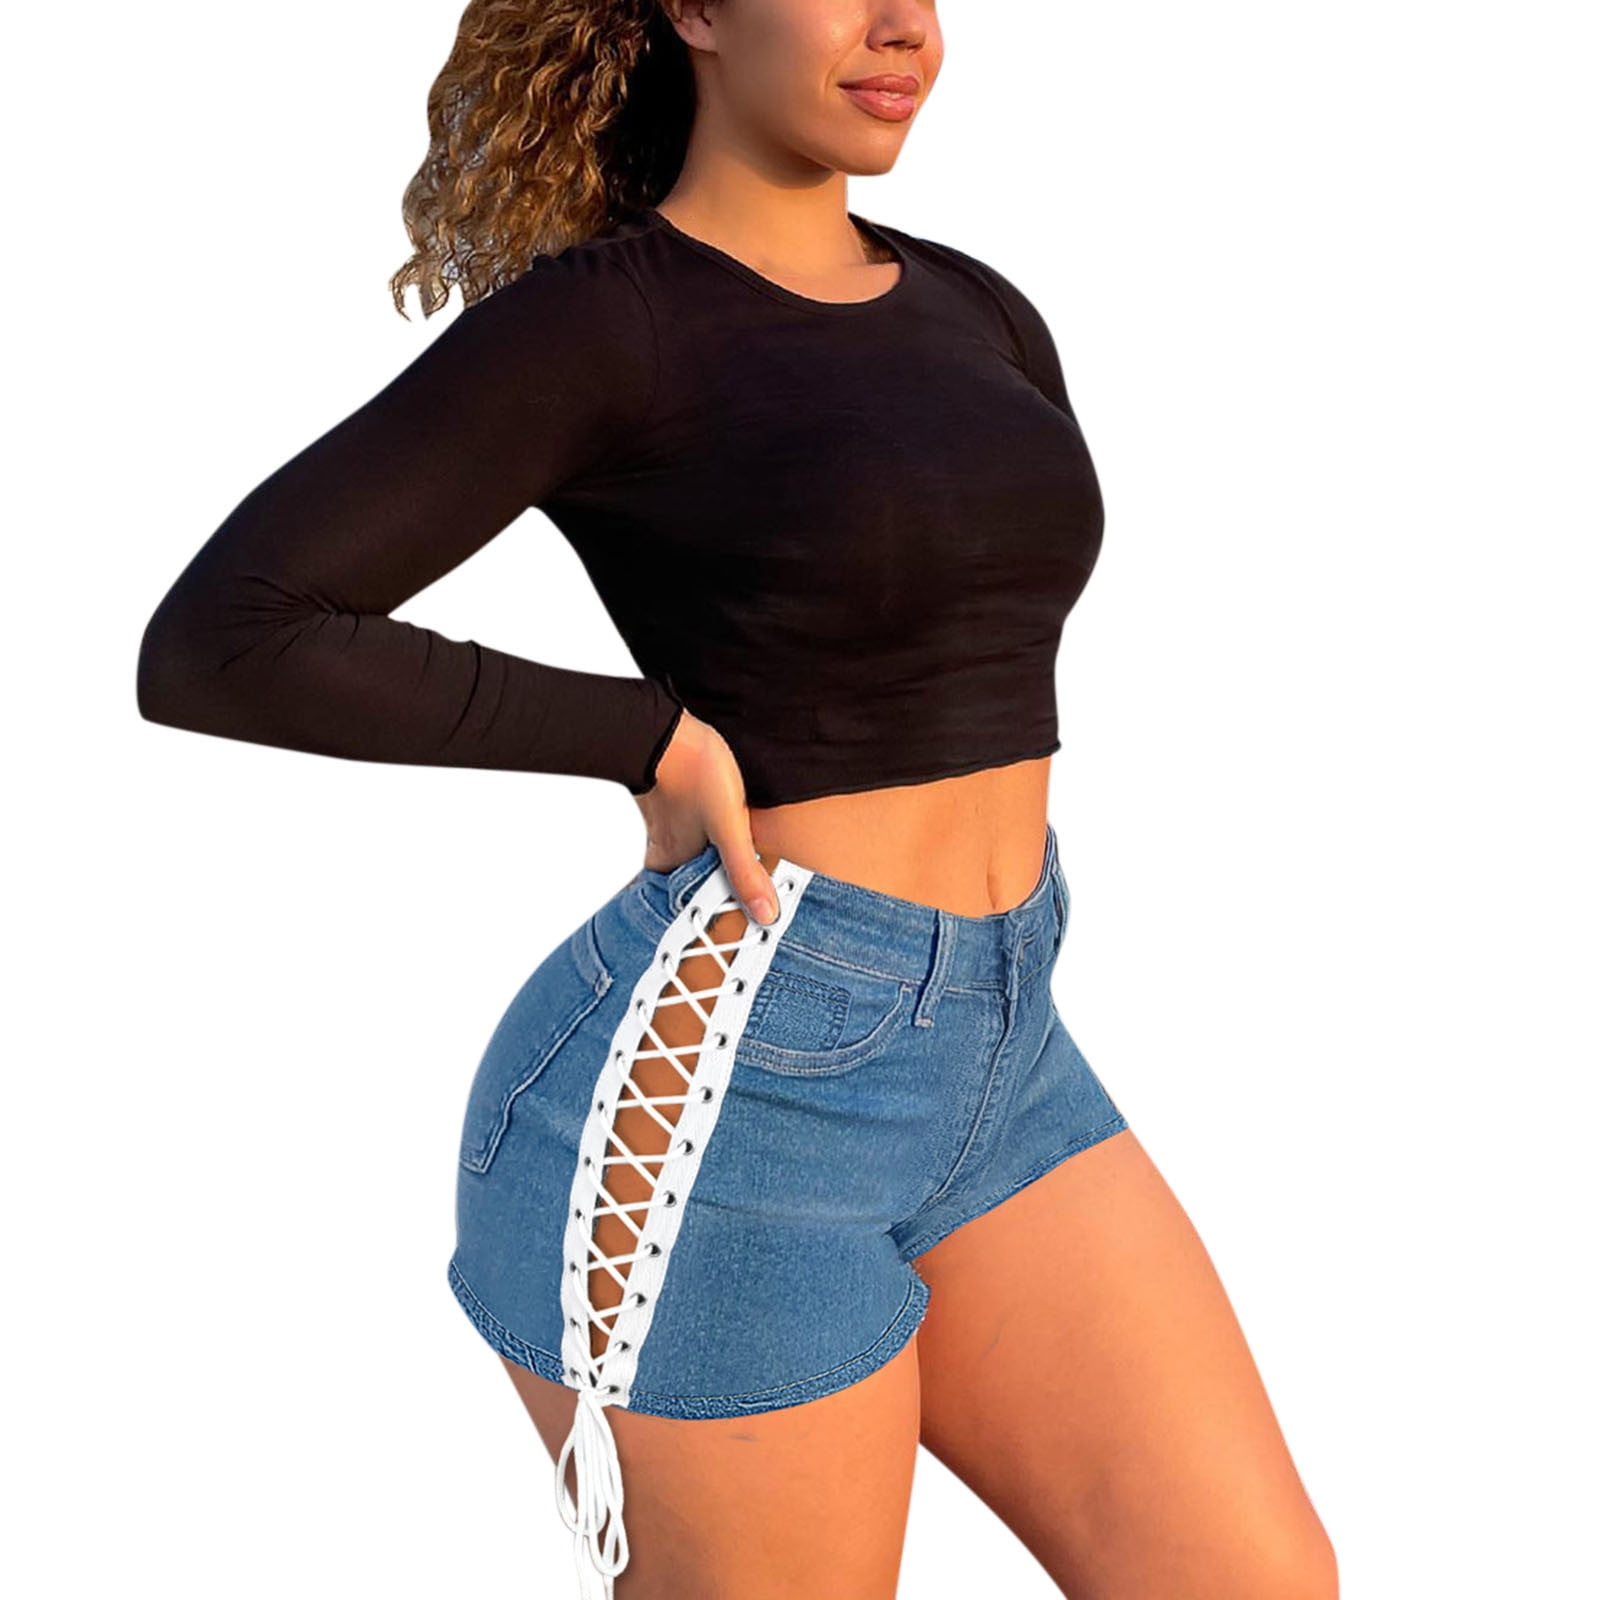 ASEIDFNSA Womens Bell Bottom Pants Women Plus Size Pants Elastic Waist  Womens Ripped Hole Denim Shorts Lace Up Jeans Pants Rave Clothes Night Club  